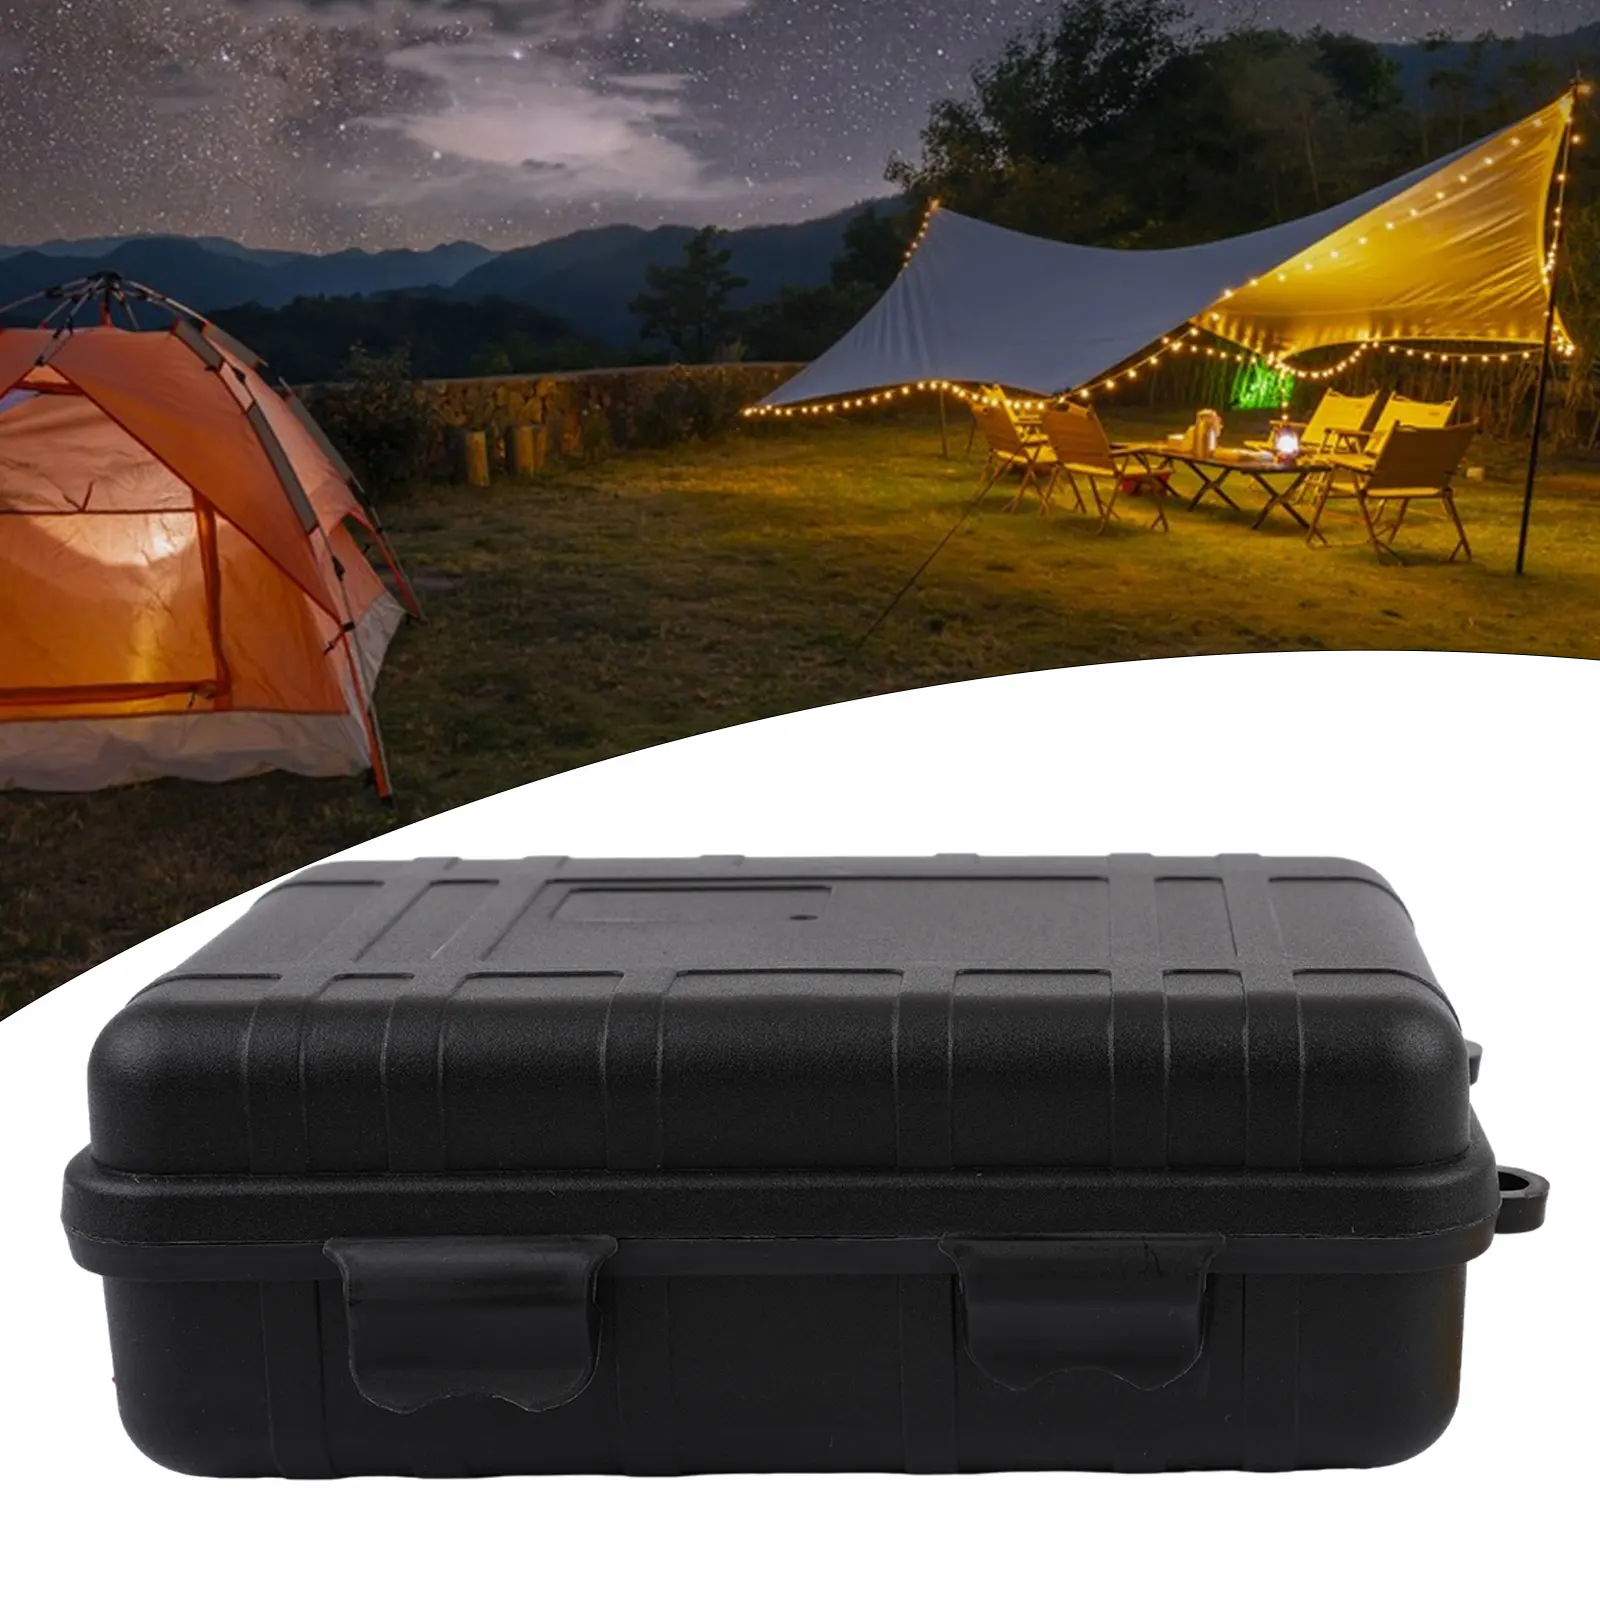 

Waterproof Outdoor Camping EDC-Survival Container Storage Case Box Tacticals Defense Equipment First Aid SOS For Wilderness Adve